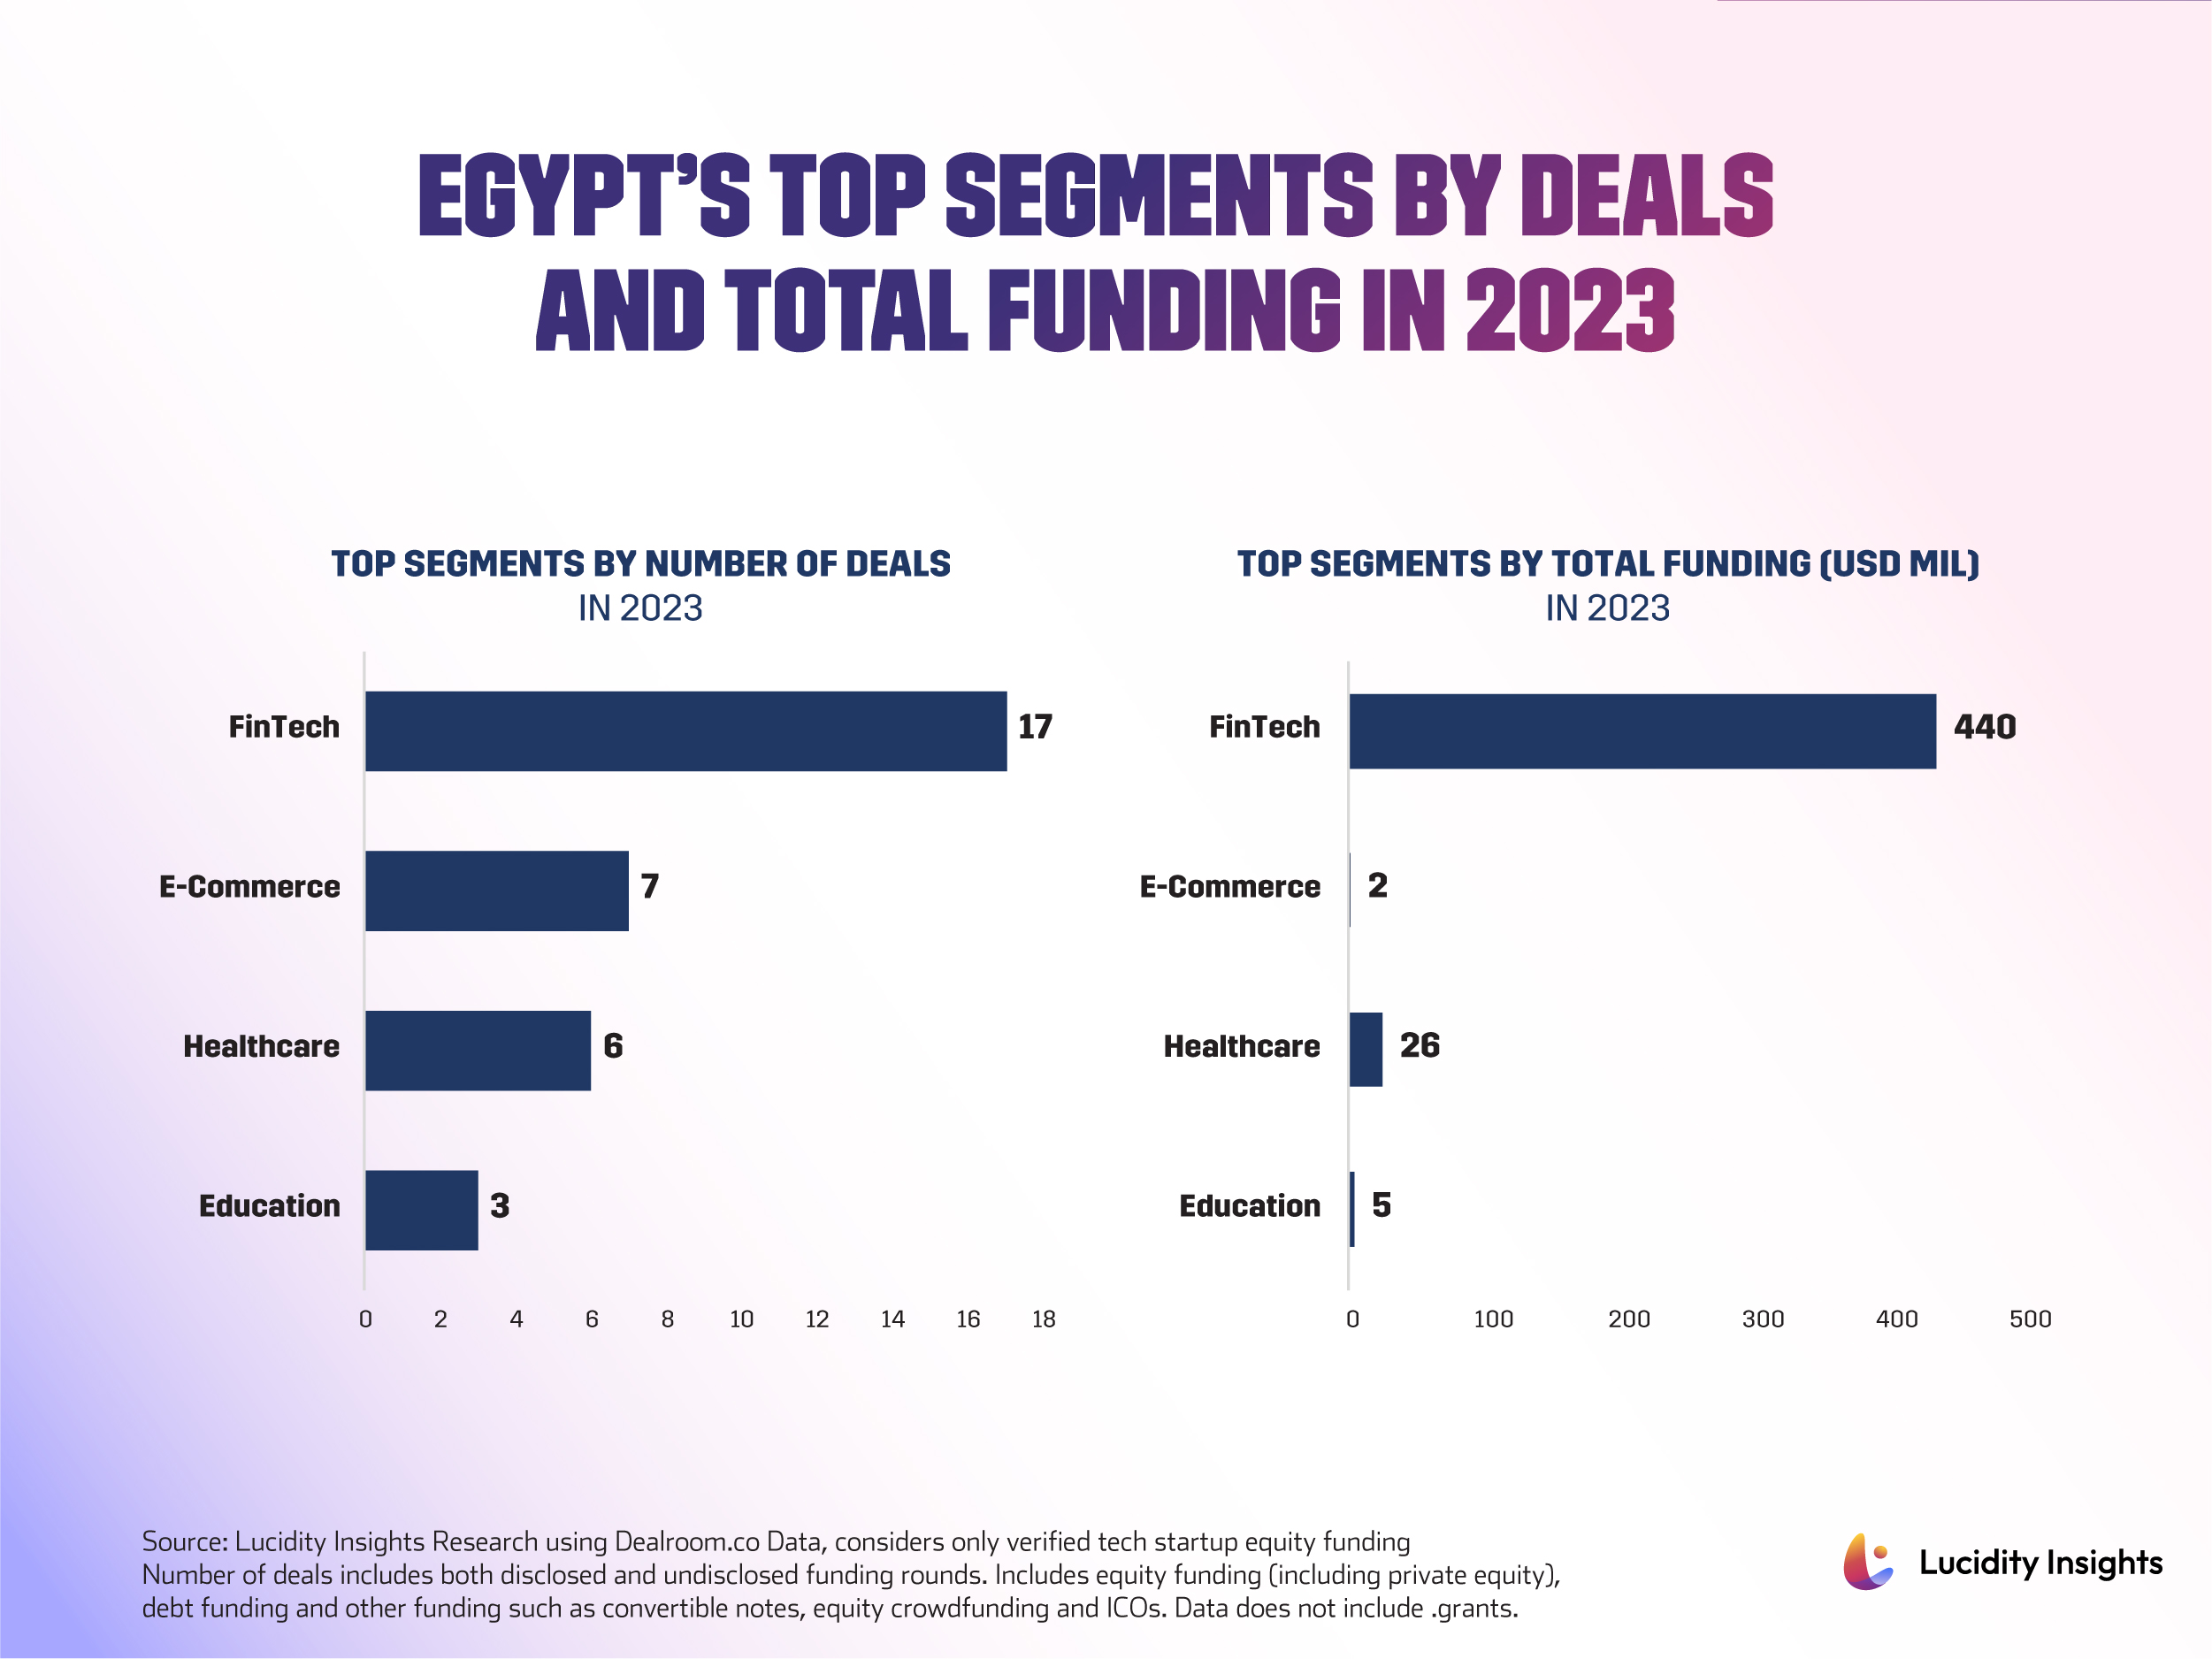 Egypt's Top Segments by Deals and Total Funding ($Mil) in 2023